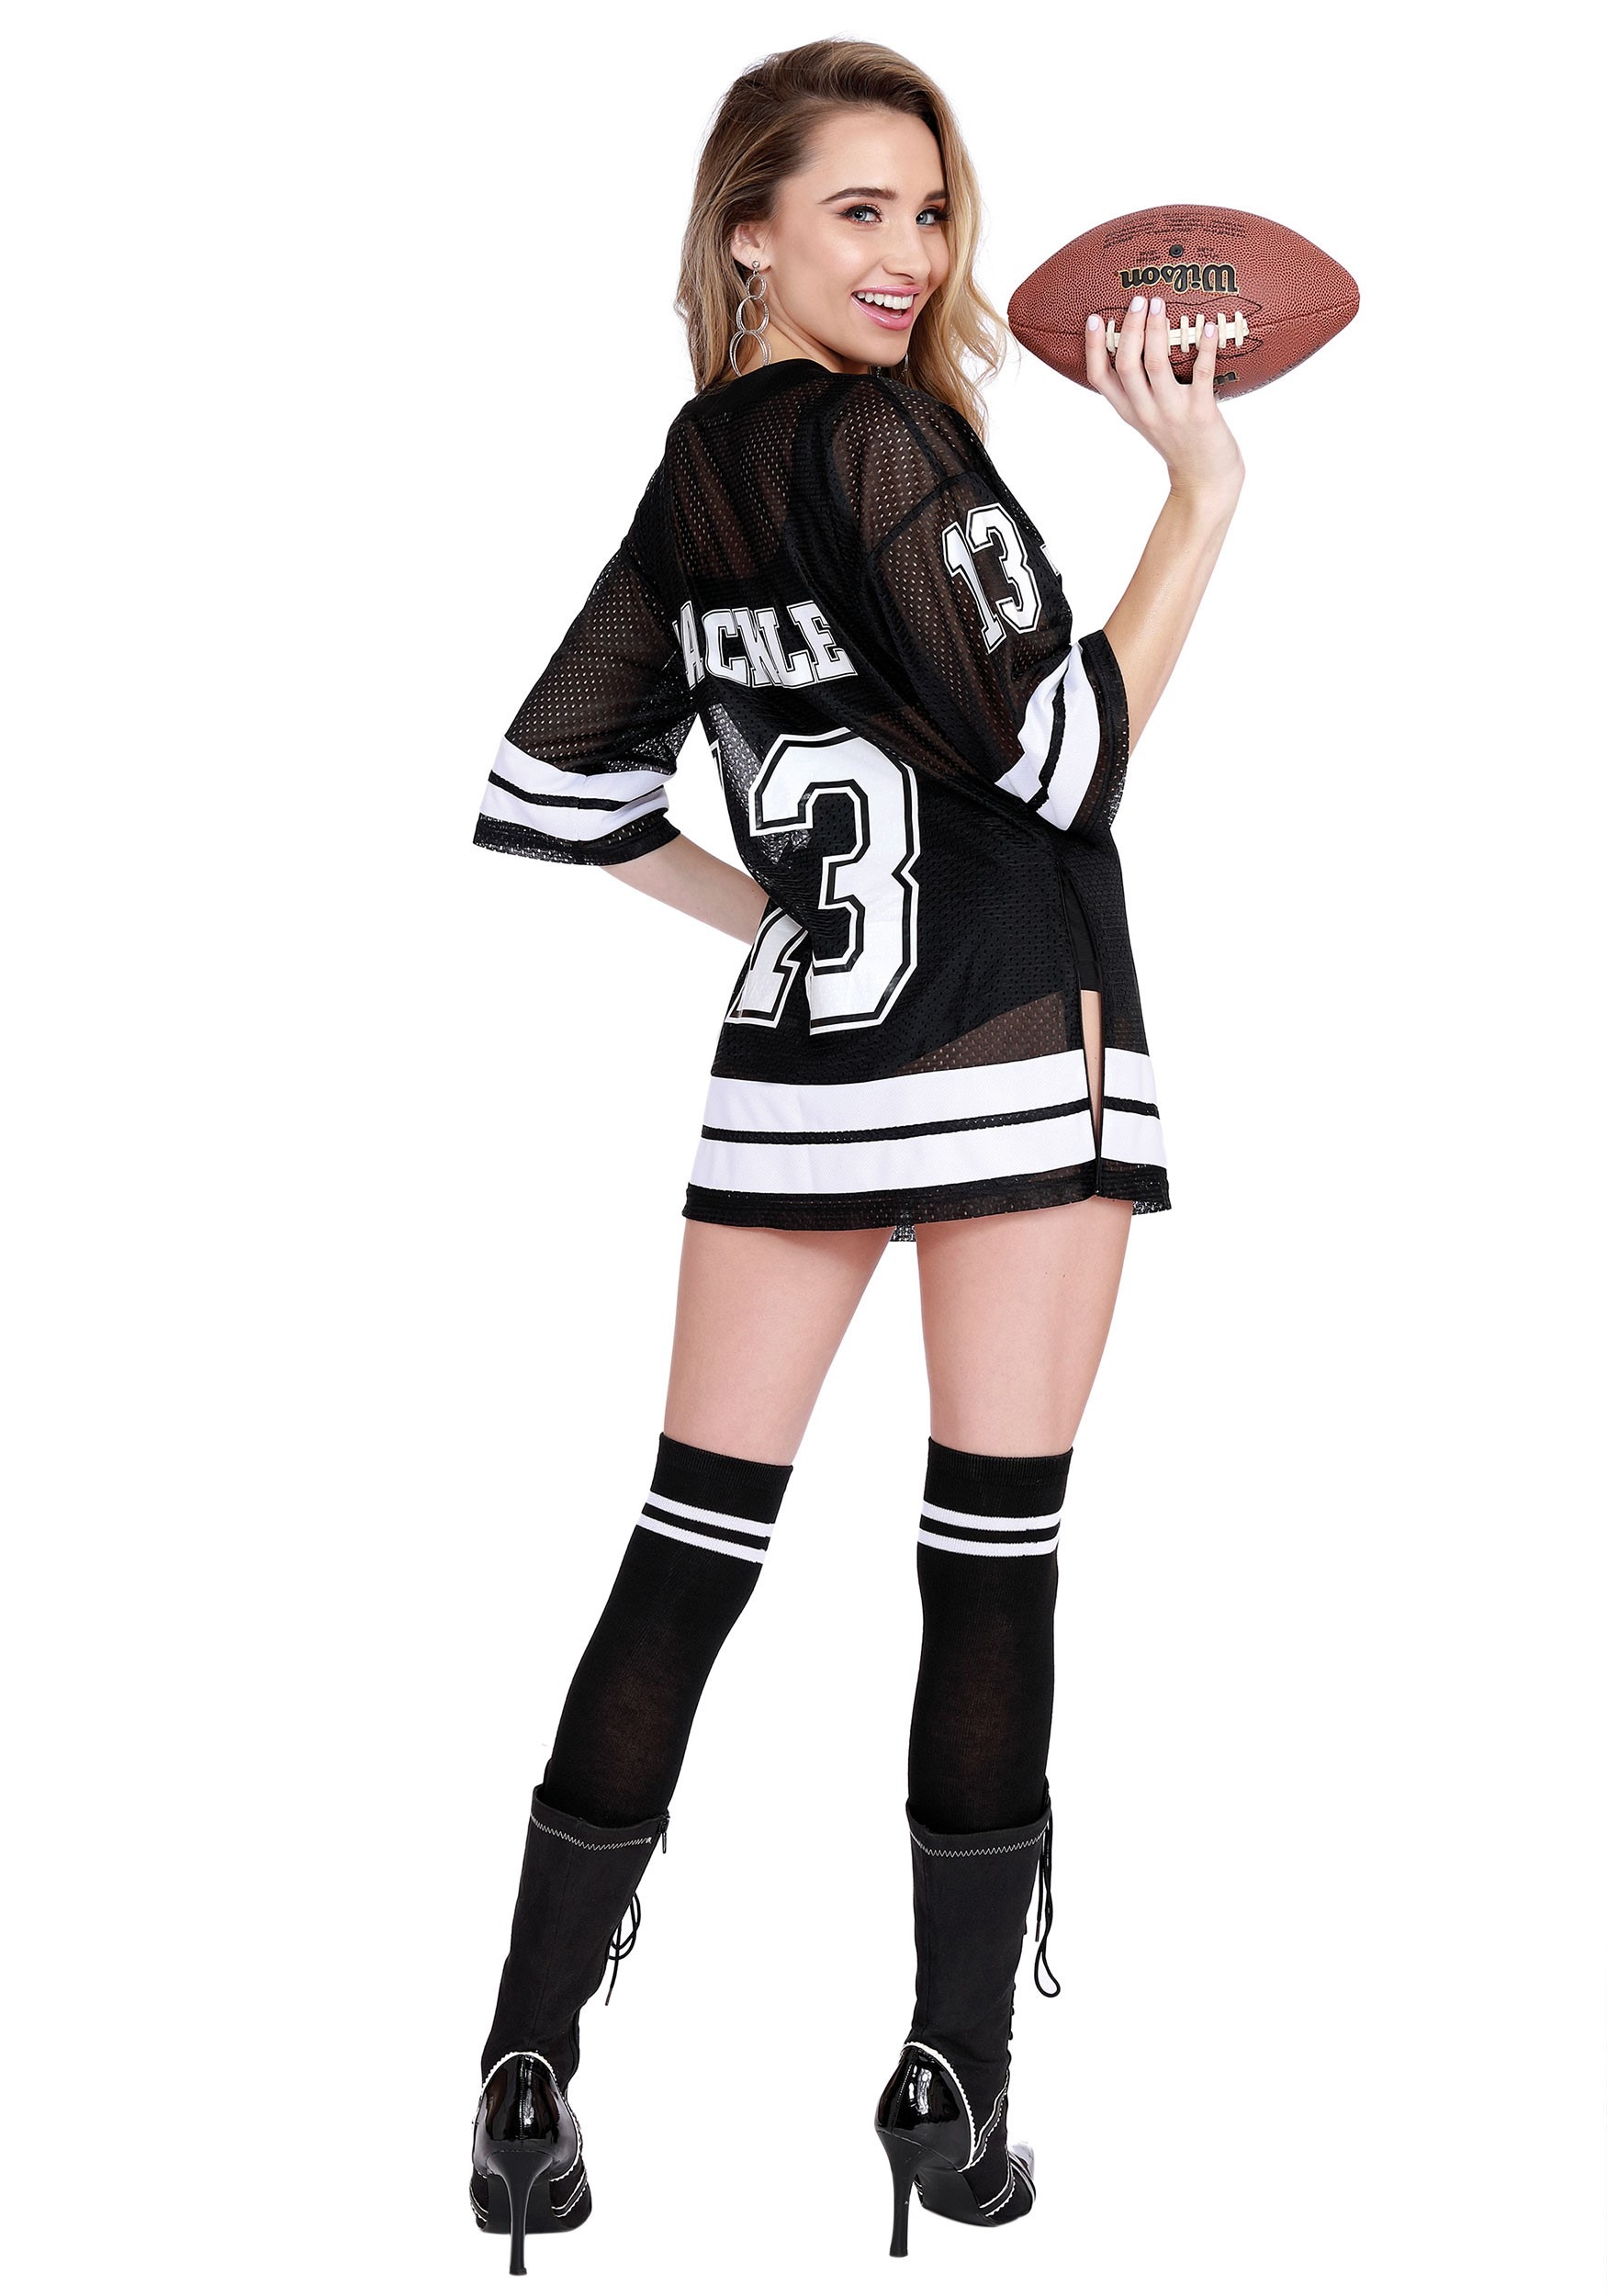 Tackle Football Jersey Women's Costume